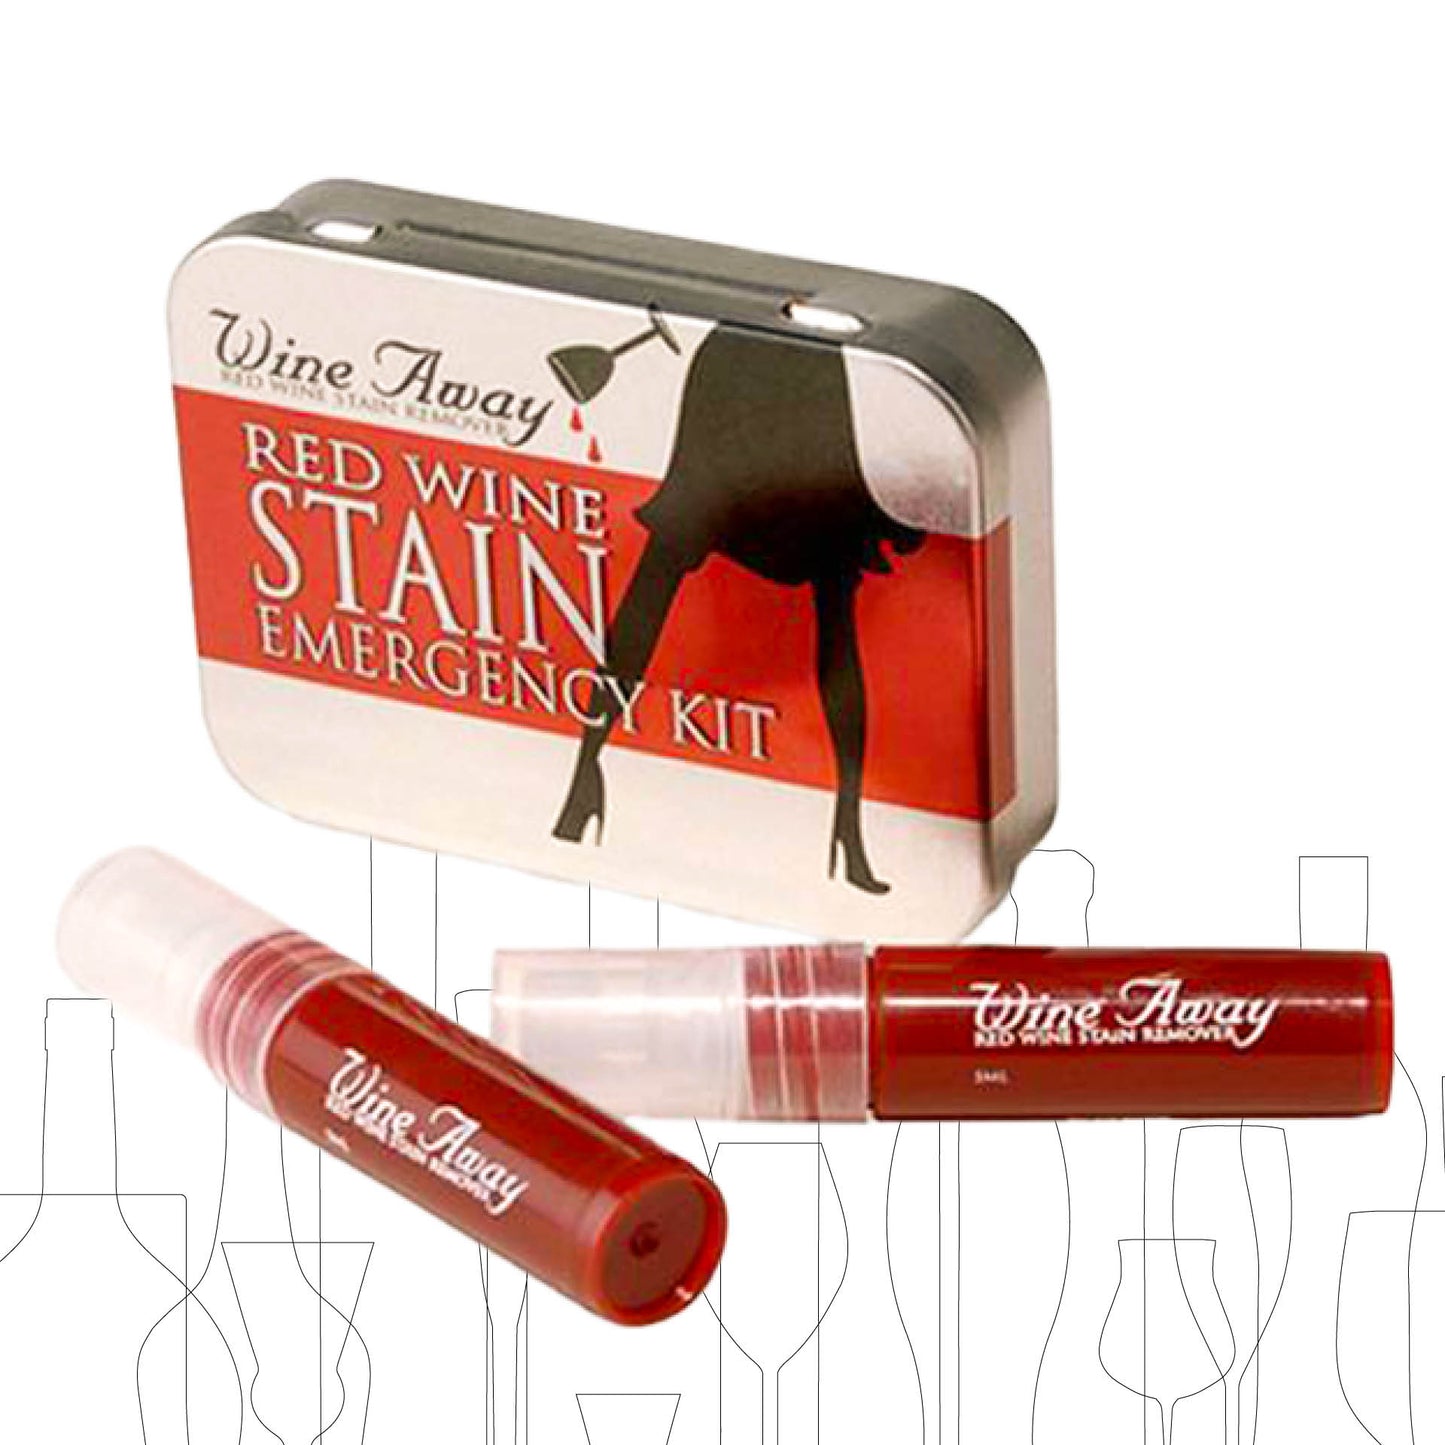 RED WINE STAIN EMERGENCY KIT